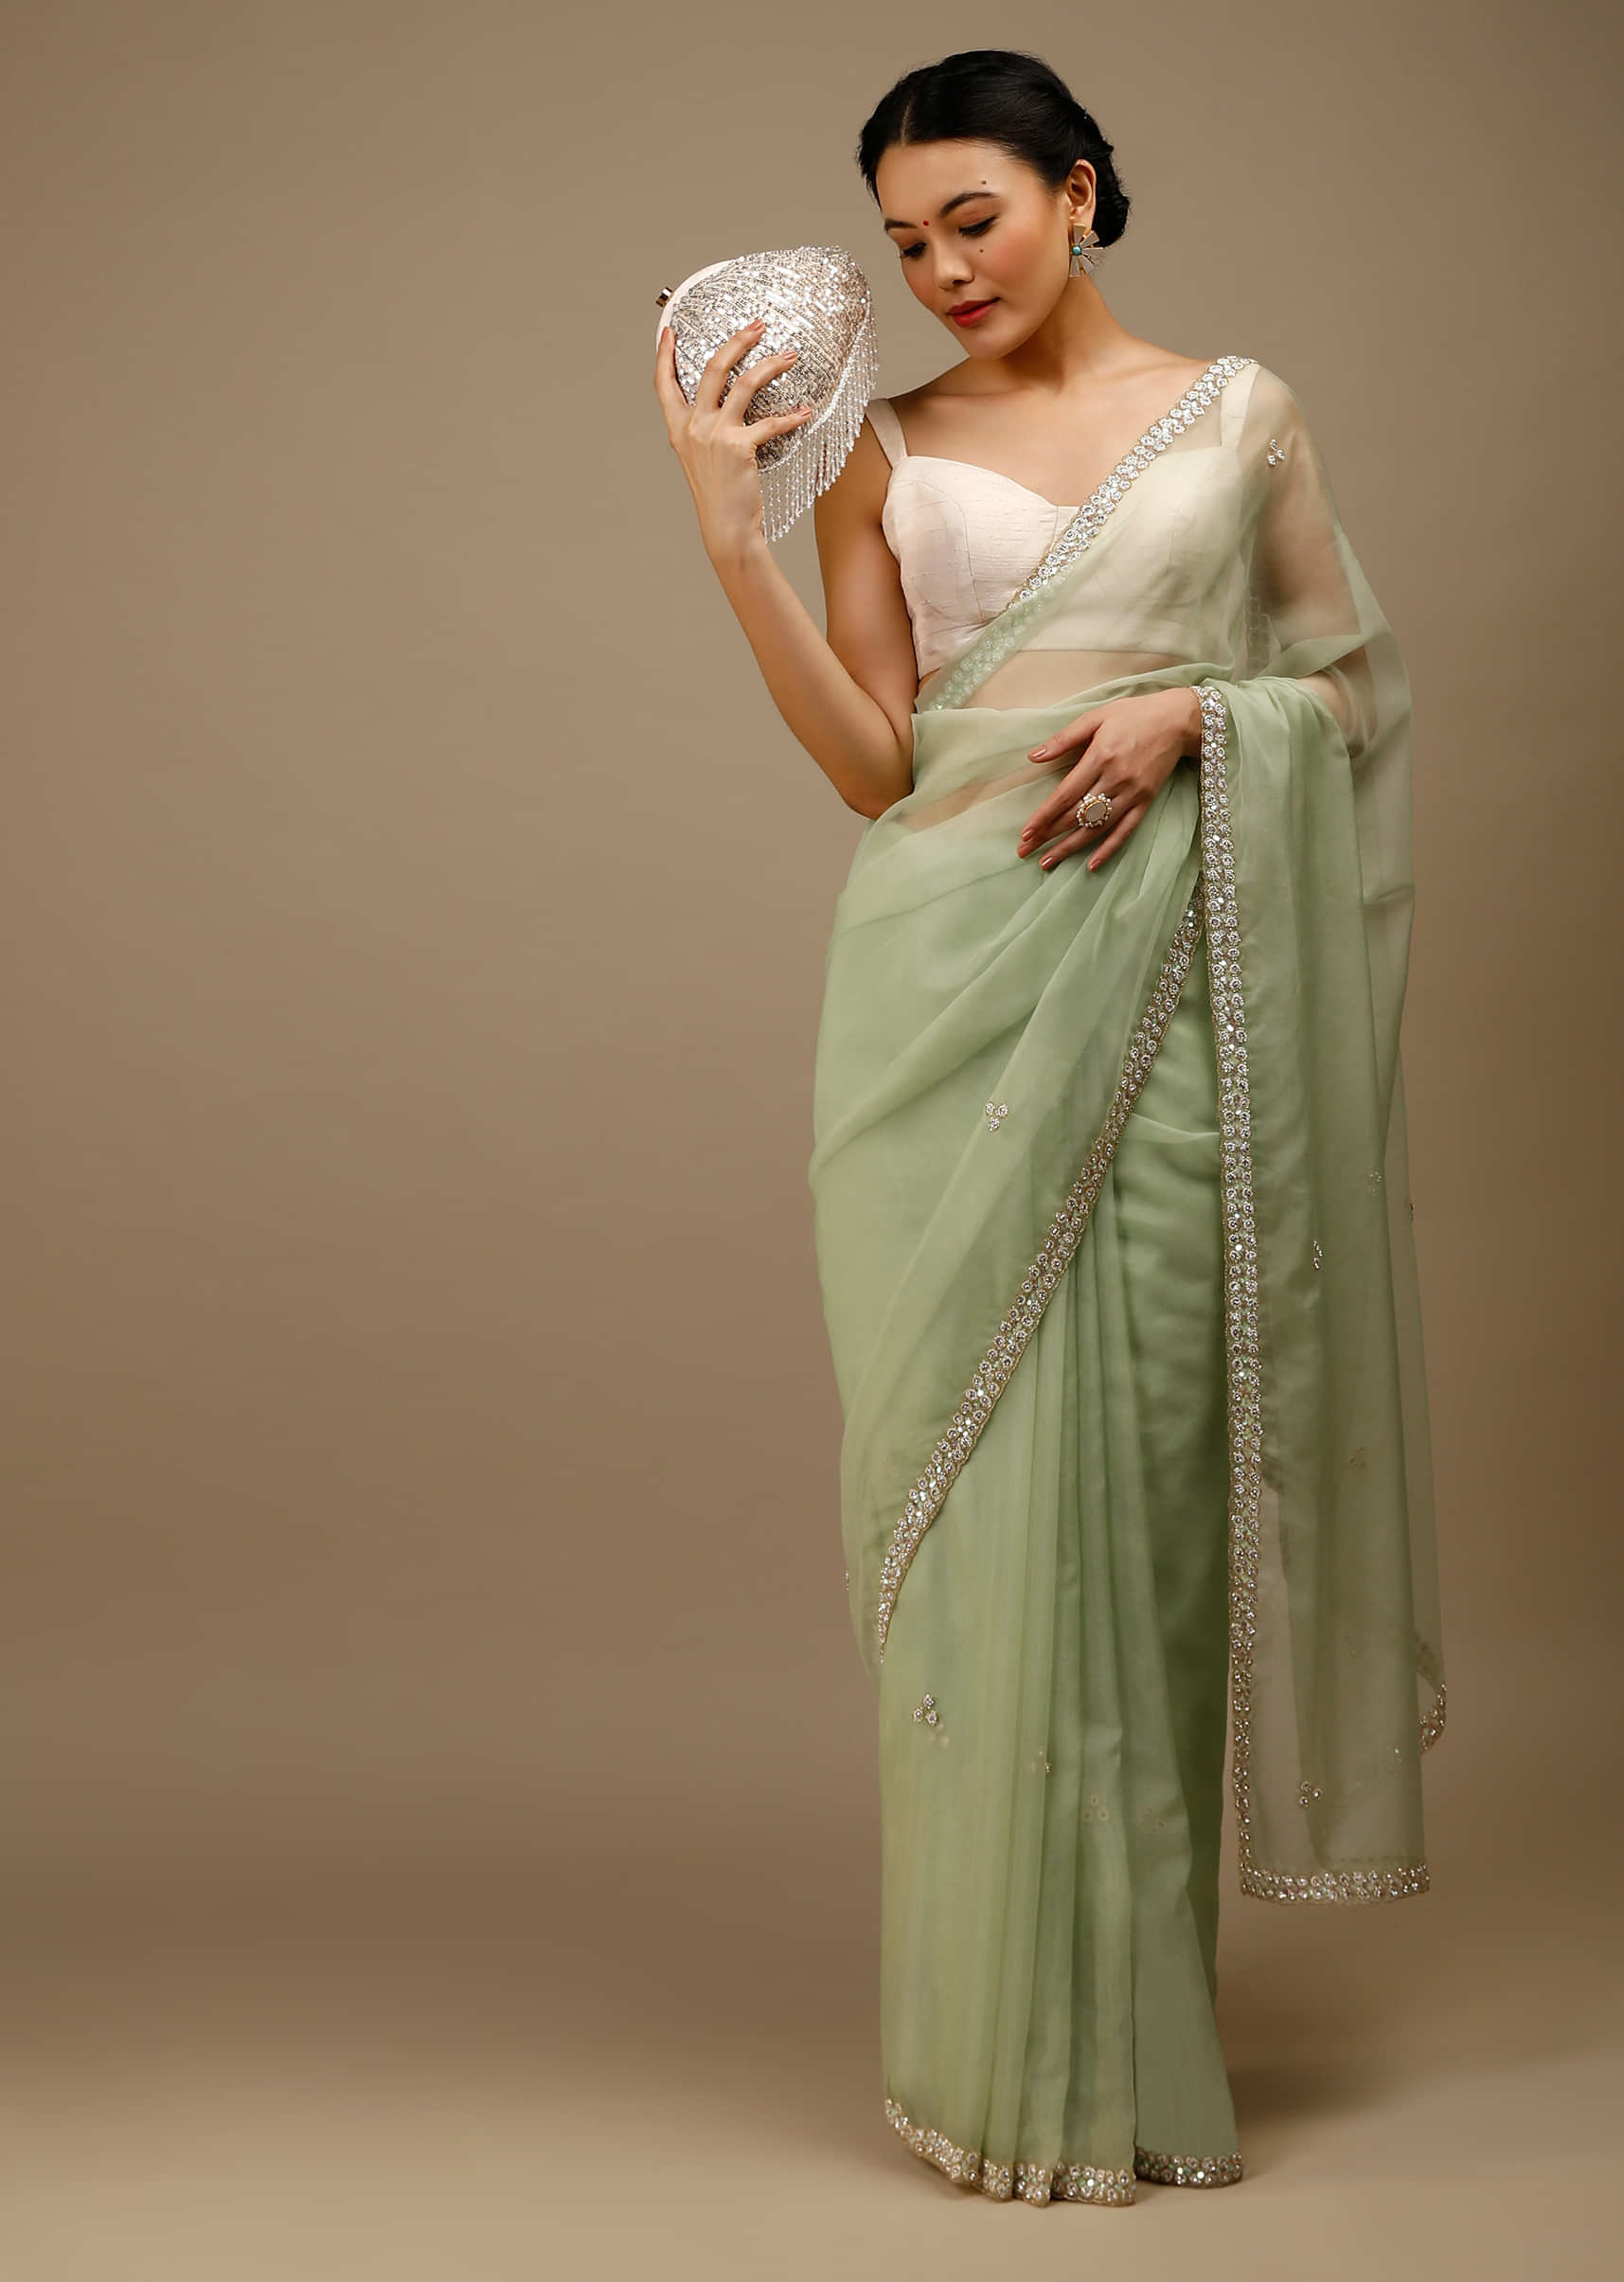 Aloe Wish Green Saree In Organza With Moti Beads And Stone Embroidered Round Motifs On The Border And Butti Design